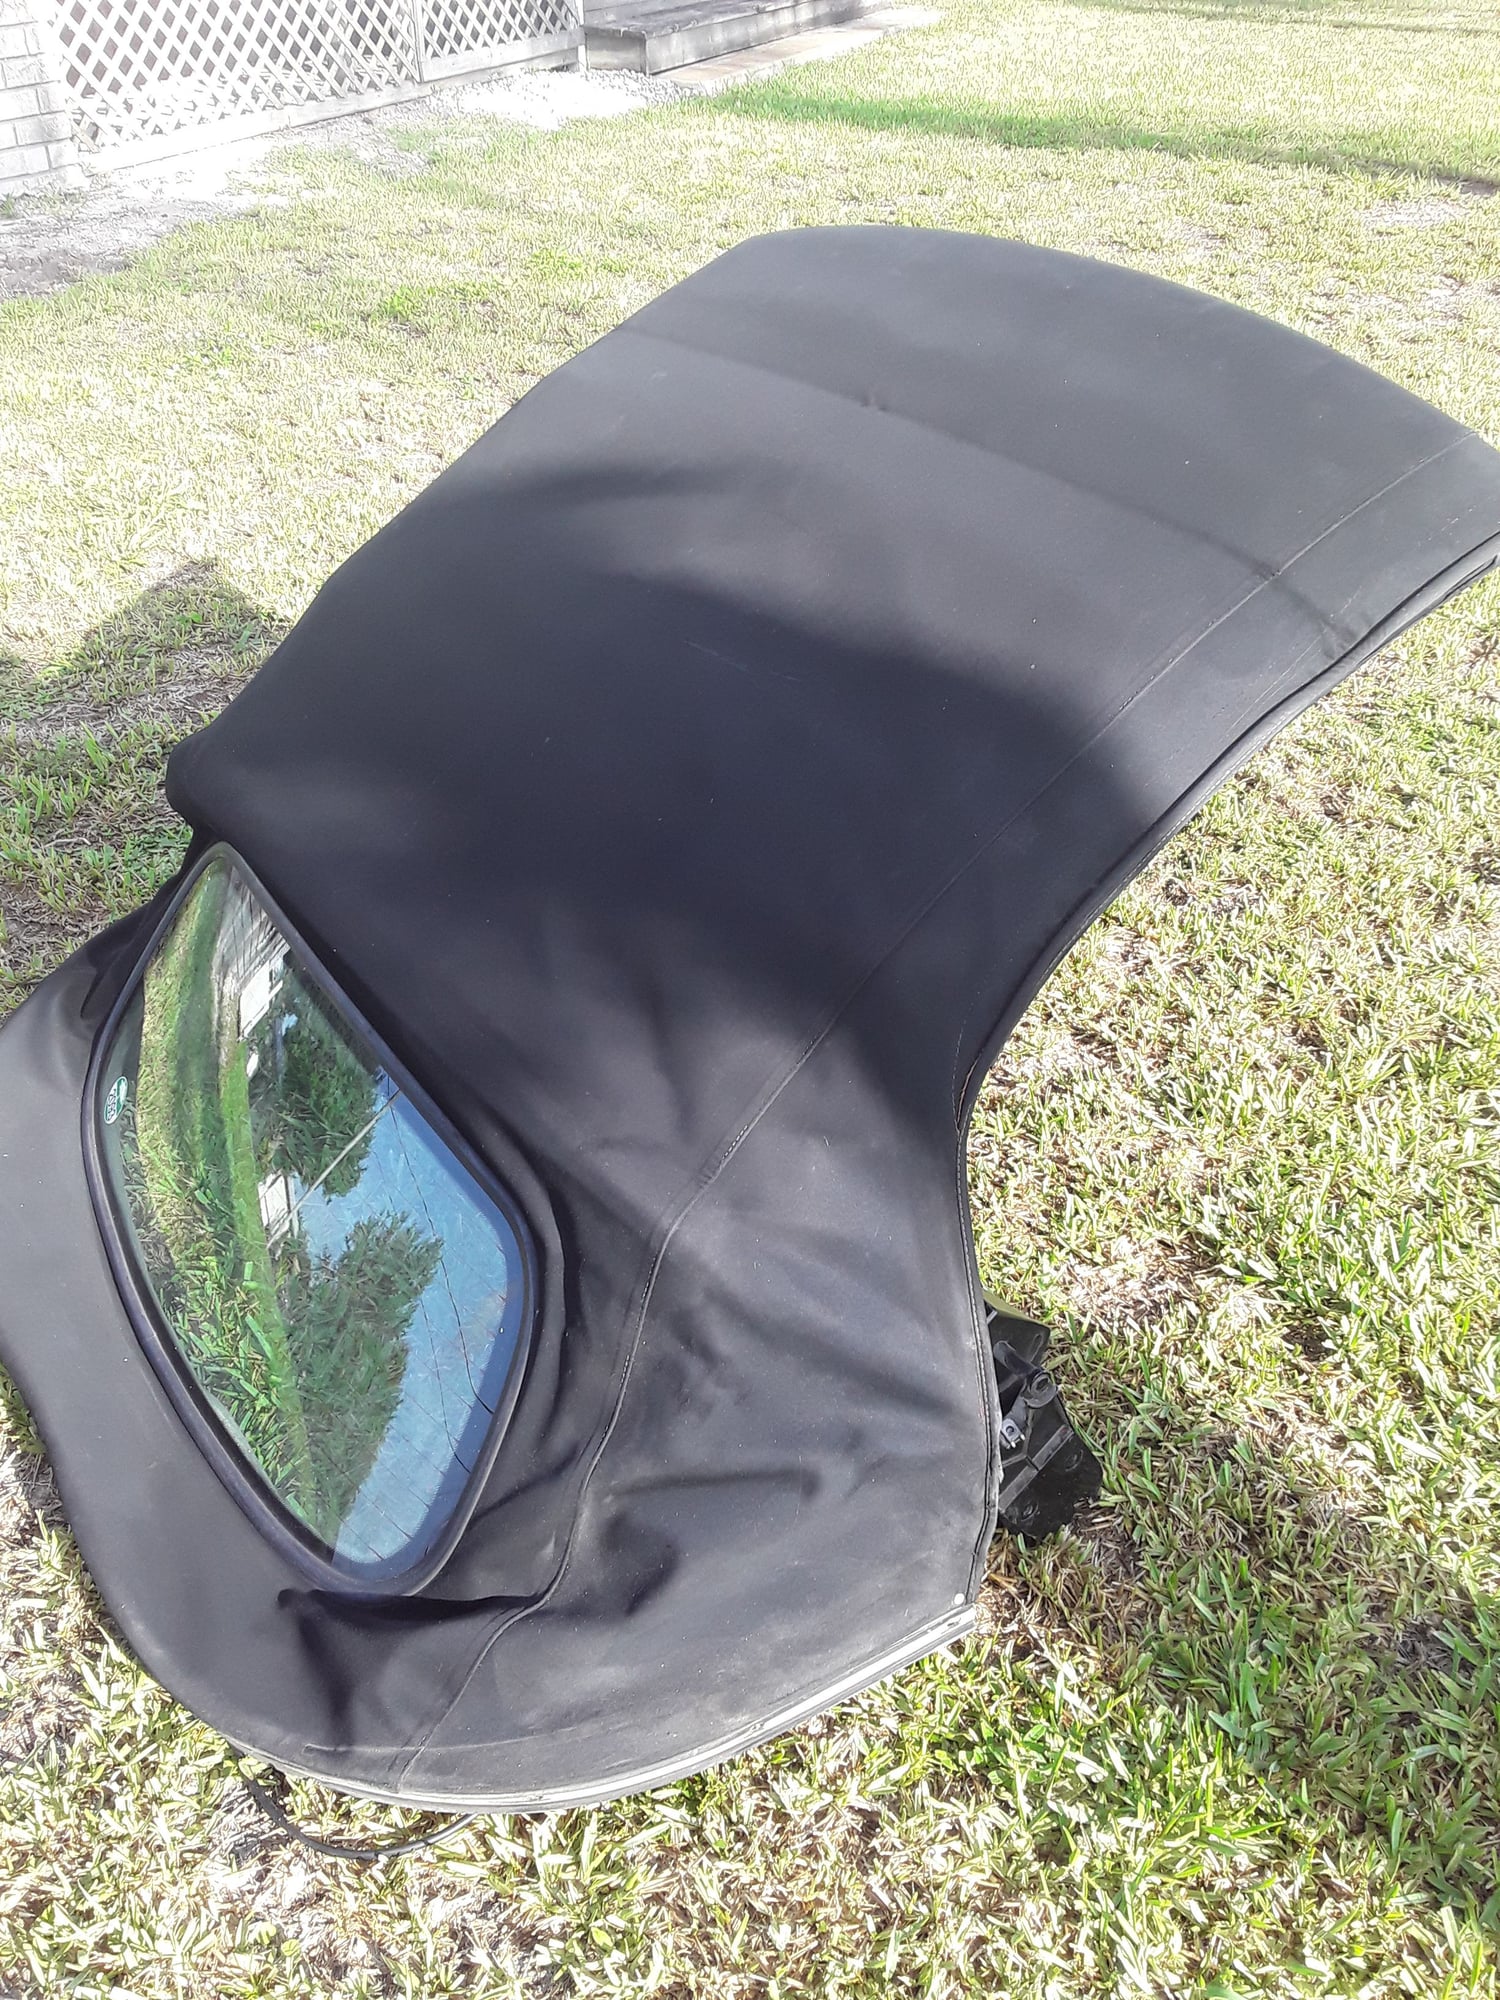 Exterior Body Parts - Xk8 /xkr convertible top - Used - 1996 to 2000 Jaguar XK8 - Okeechobee, FL 34974, United States